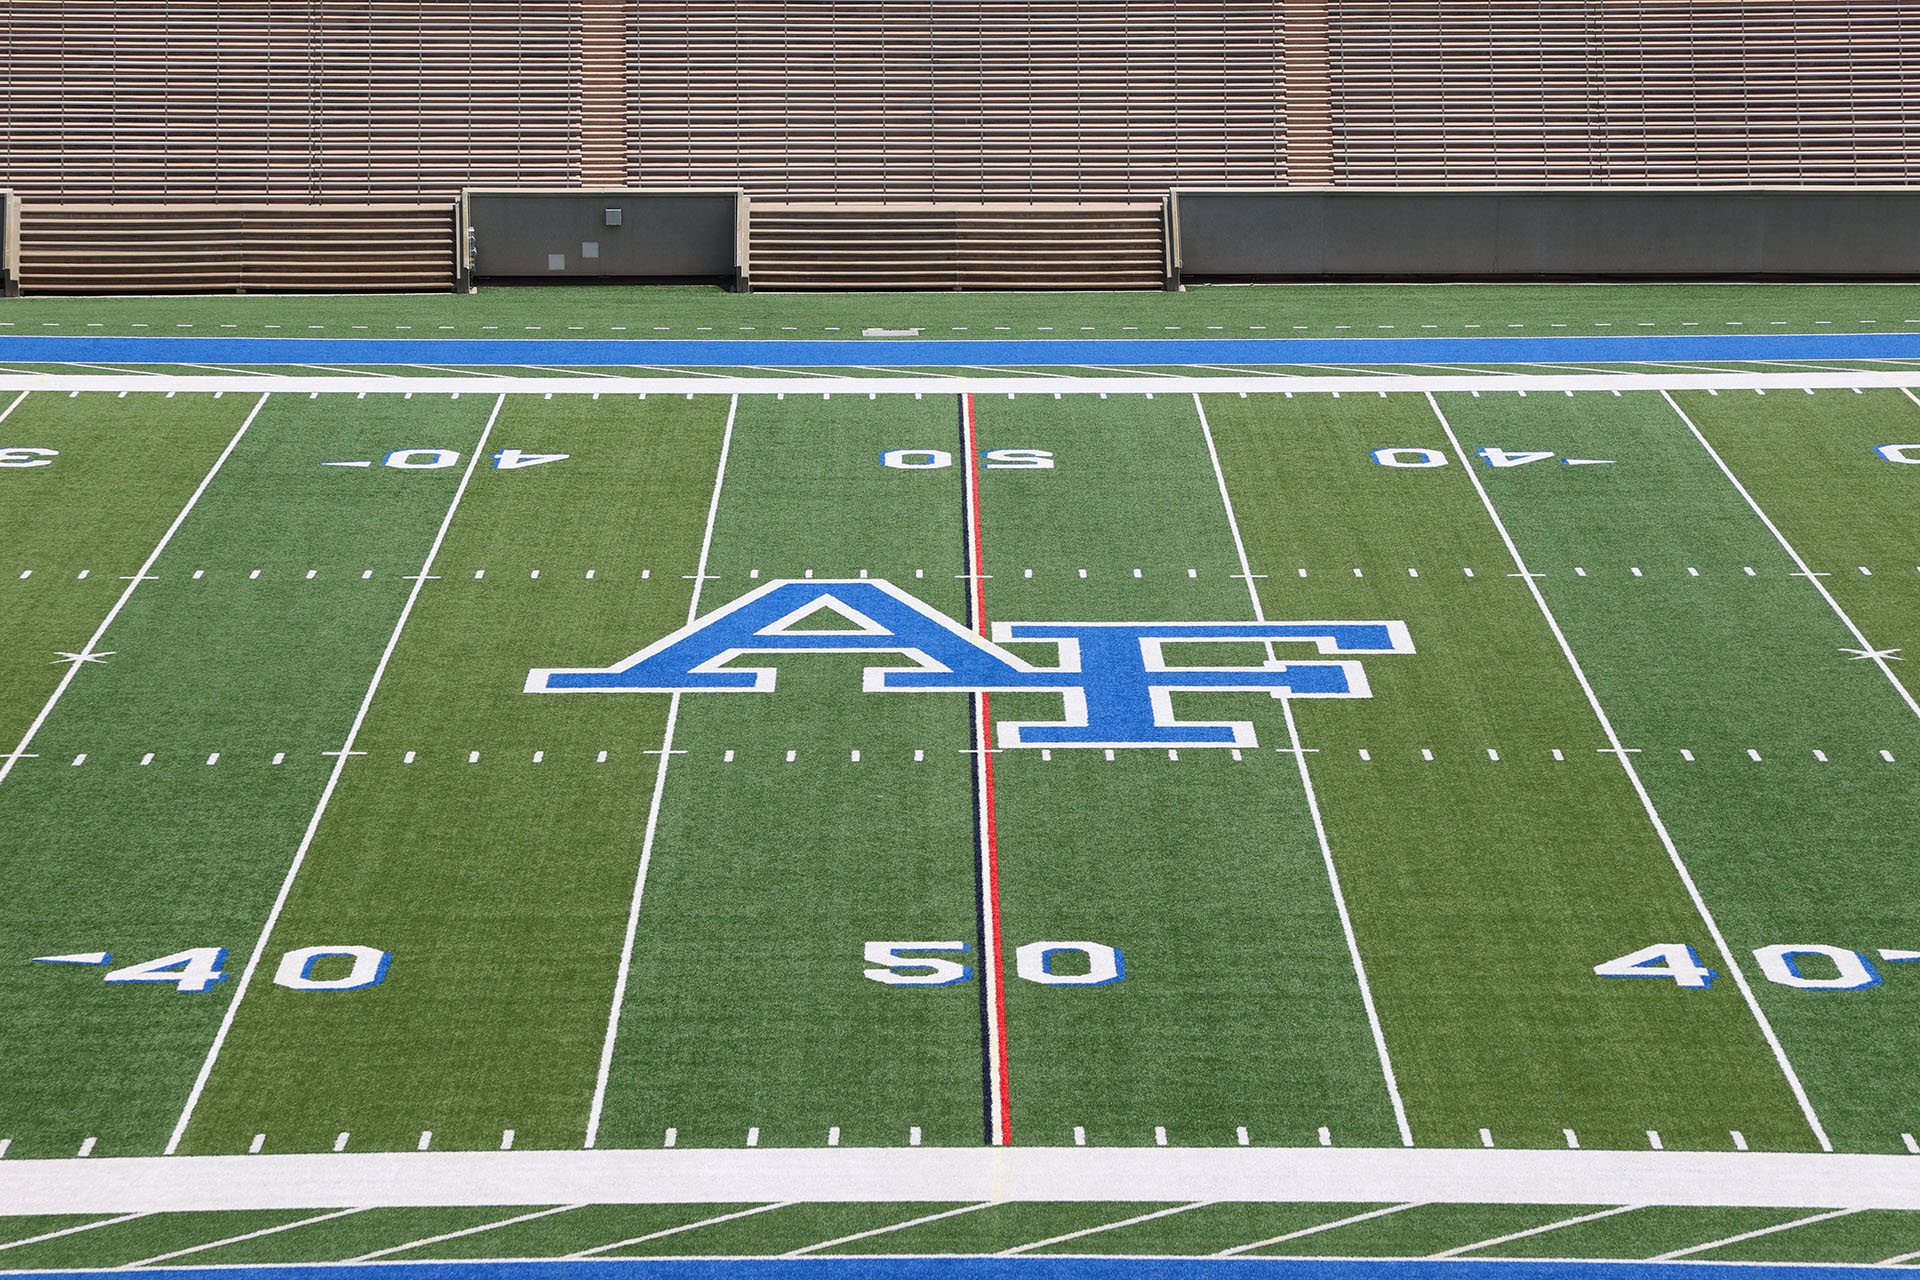 Air Force Logo on the field